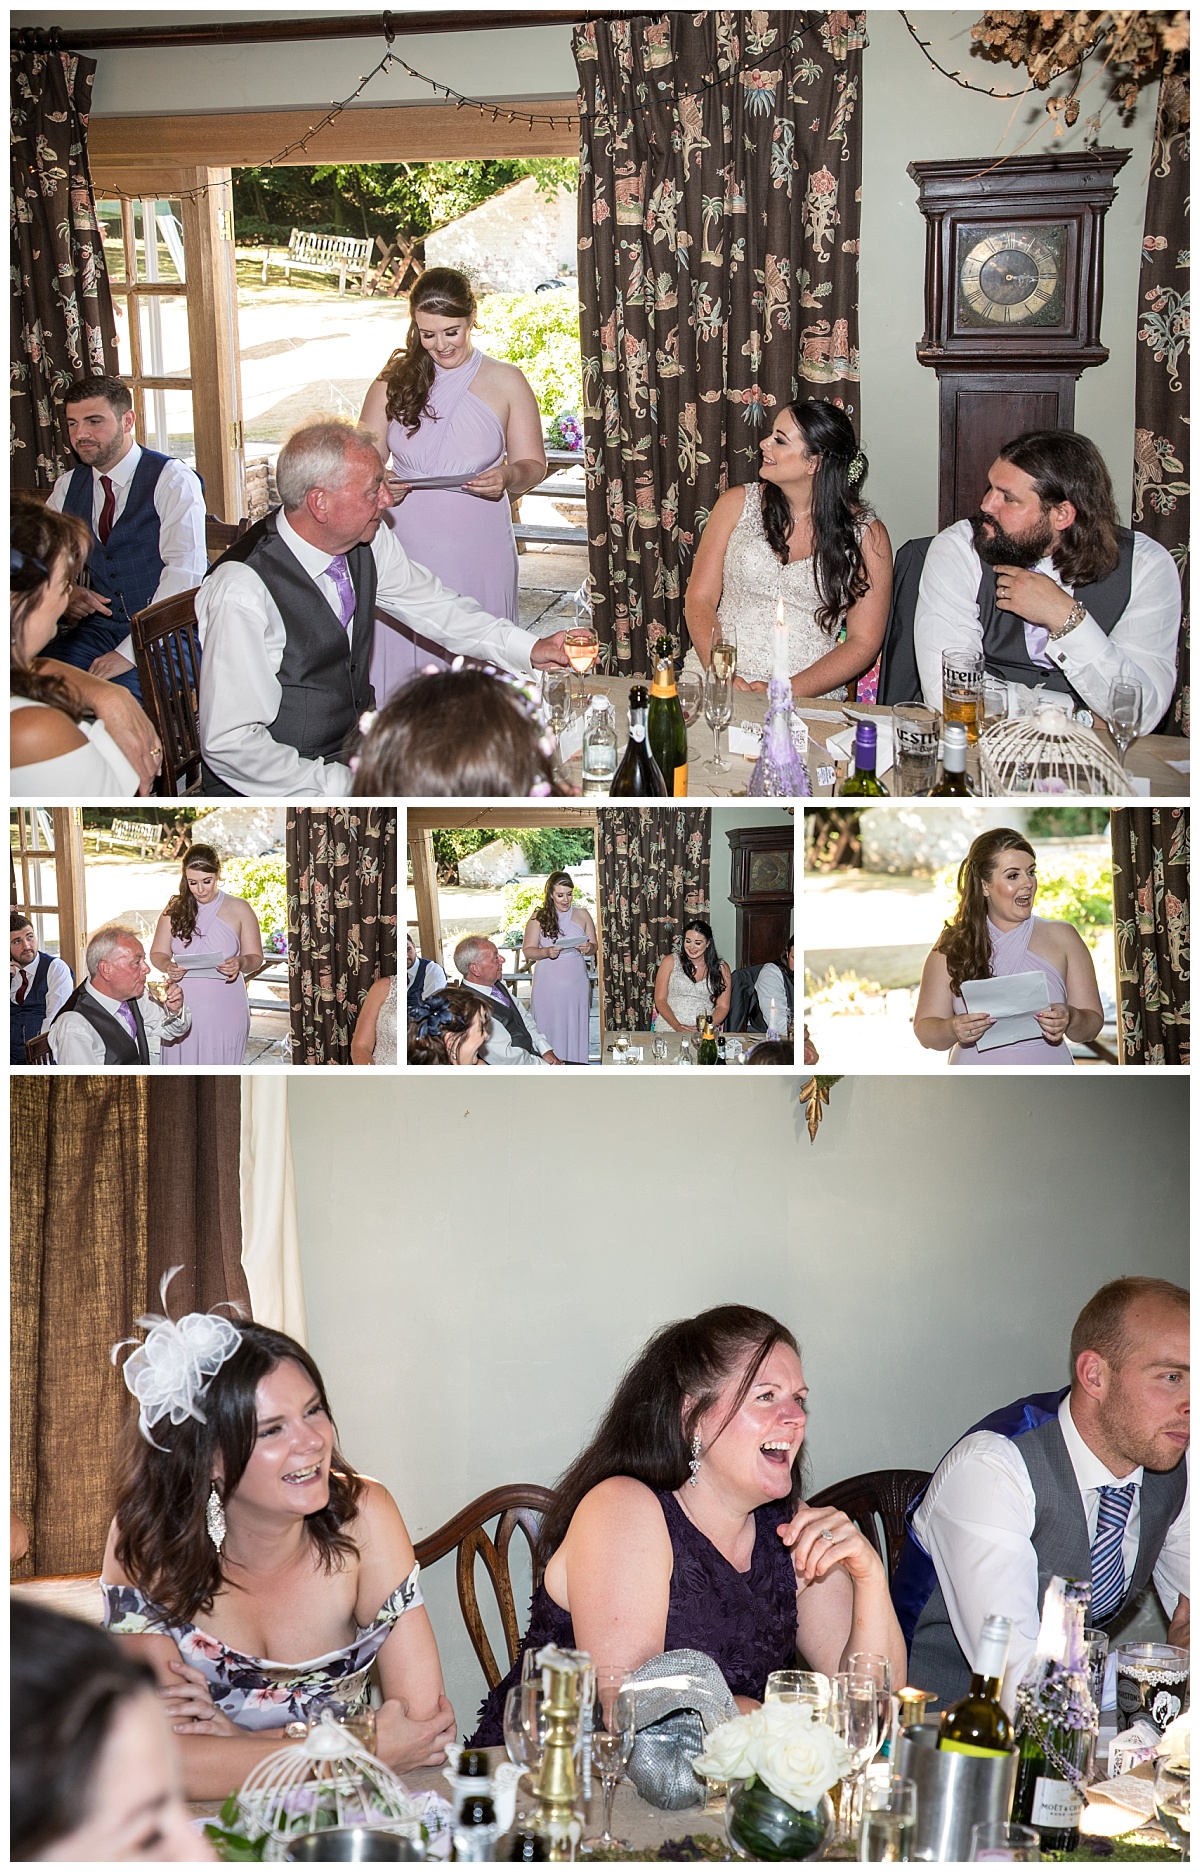 Wedding Photography Manchester - Lauren and Colyn's Wizard Wedding 60